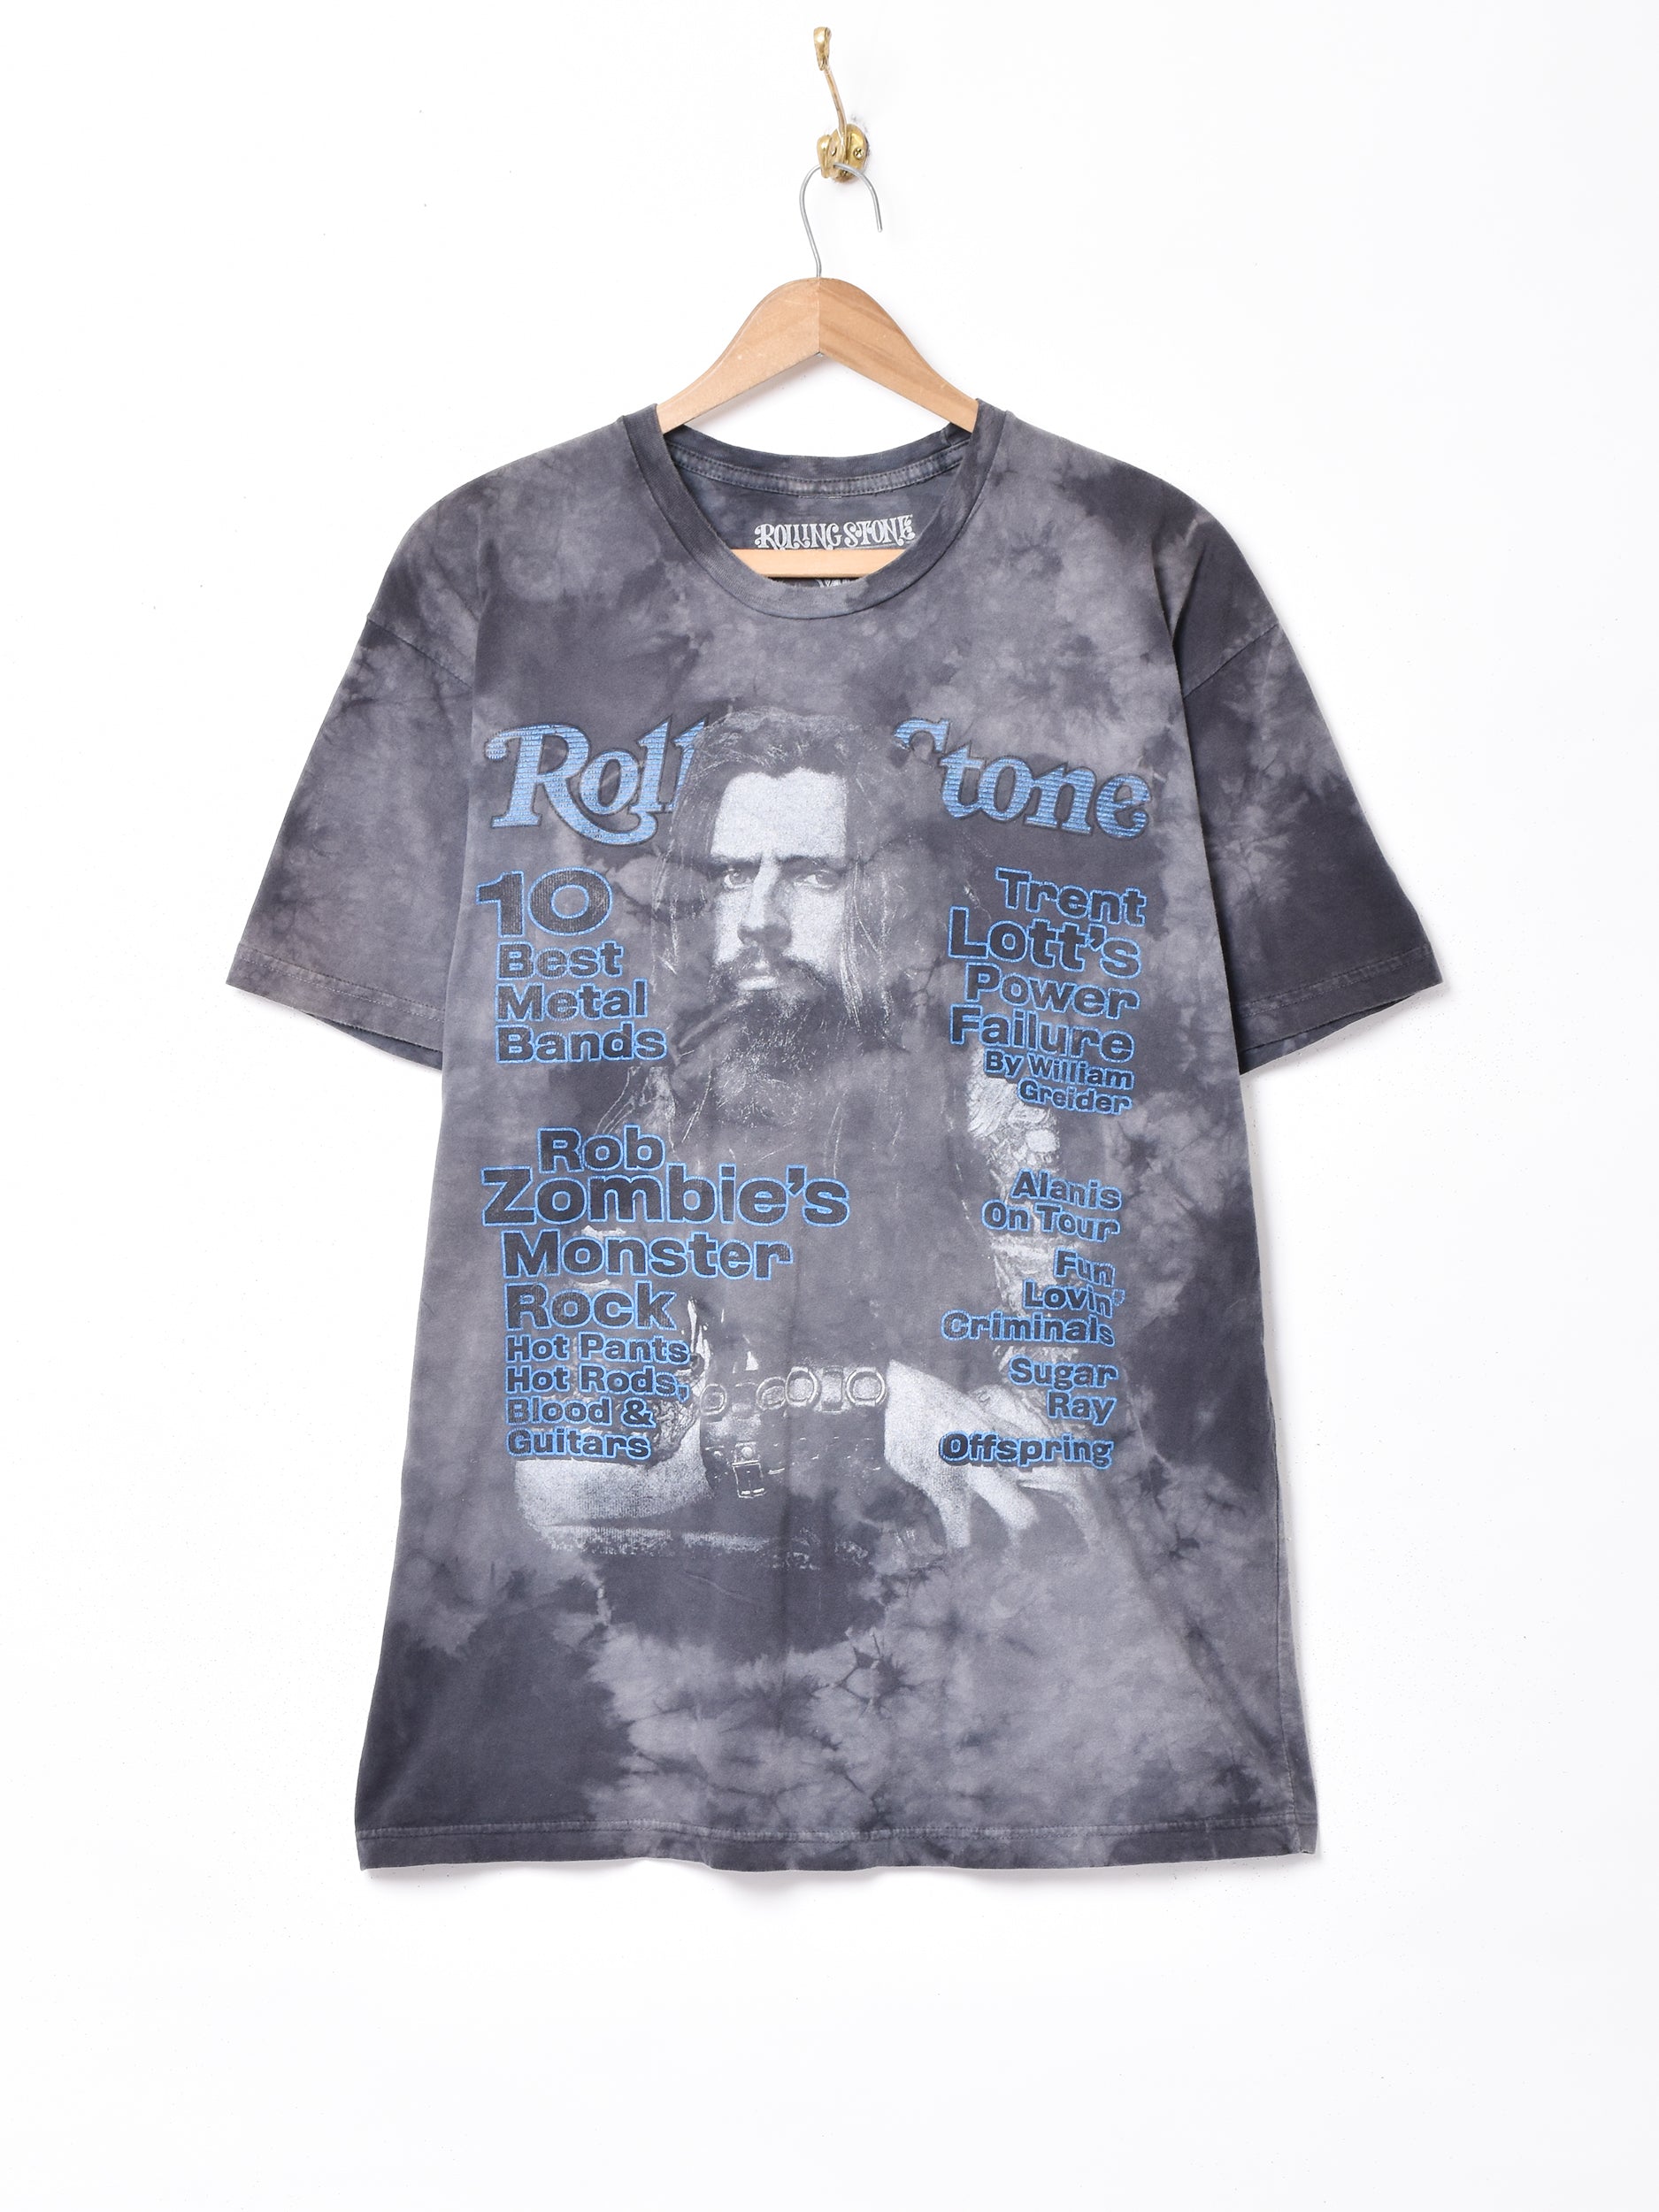 ROLLING STONE Rob Zombi プリントTシャツ – 古着屋Top of the Hillのネット通販サイト